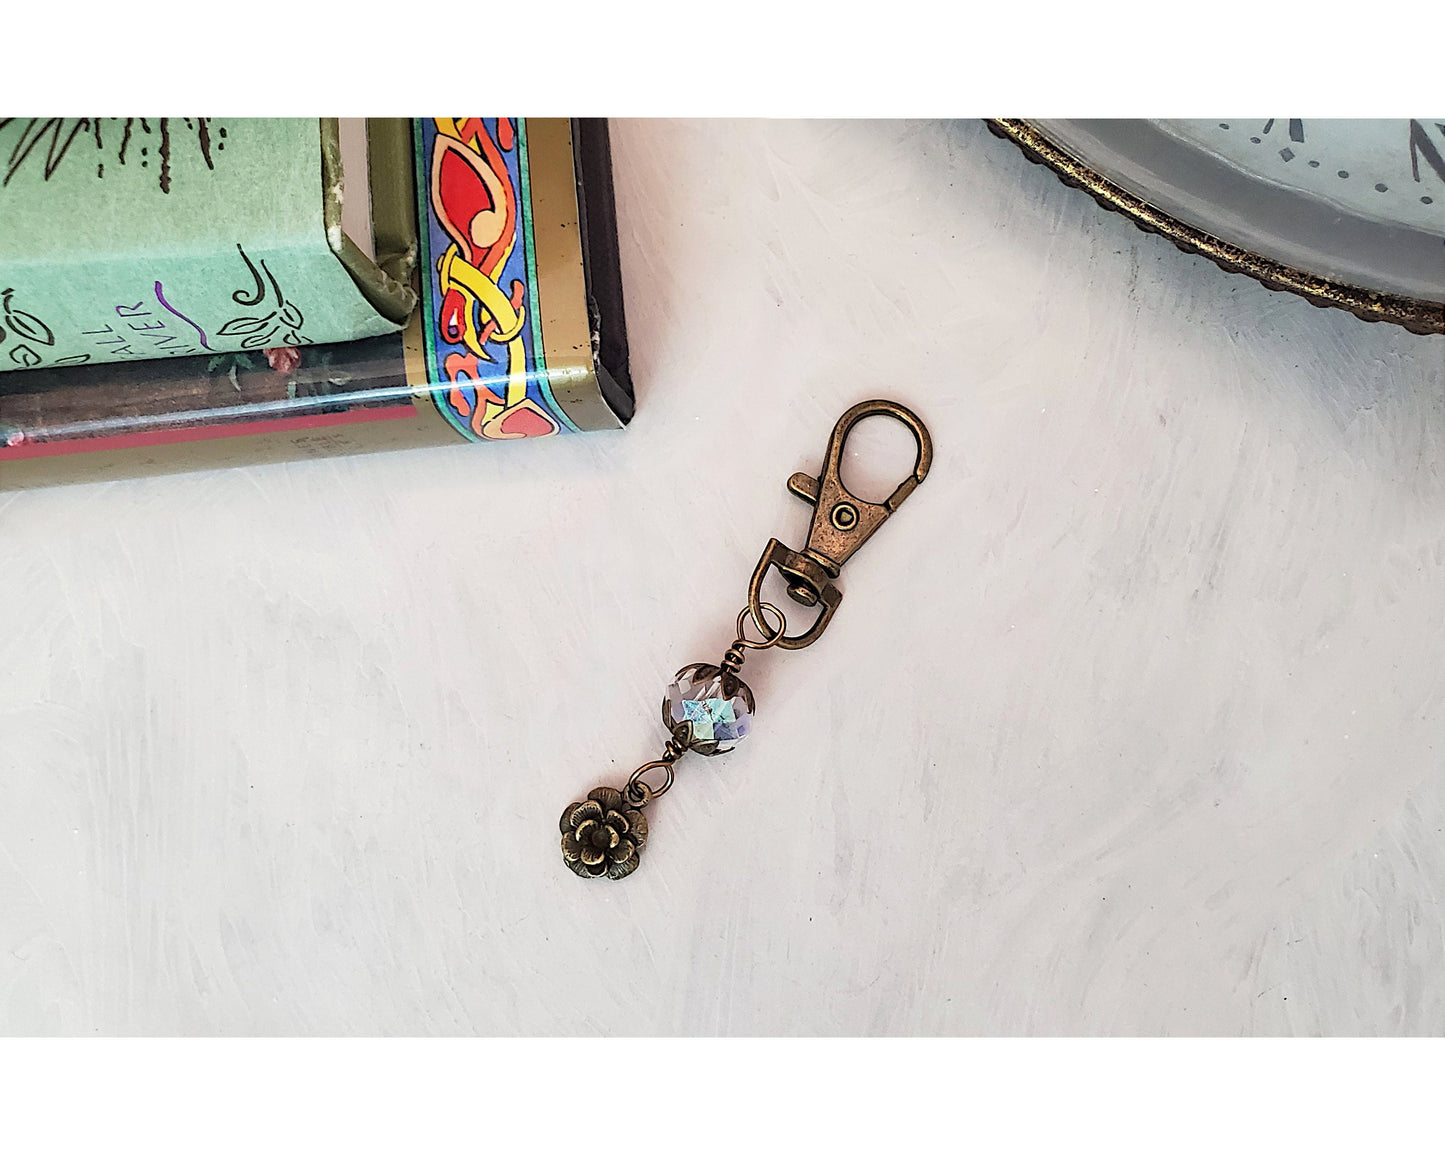 Wire Wrapped Clip or Purse Charm in Antique Bronze, Clear with Rose Charm, Cellphone Charm, Choice of Colors and Metals